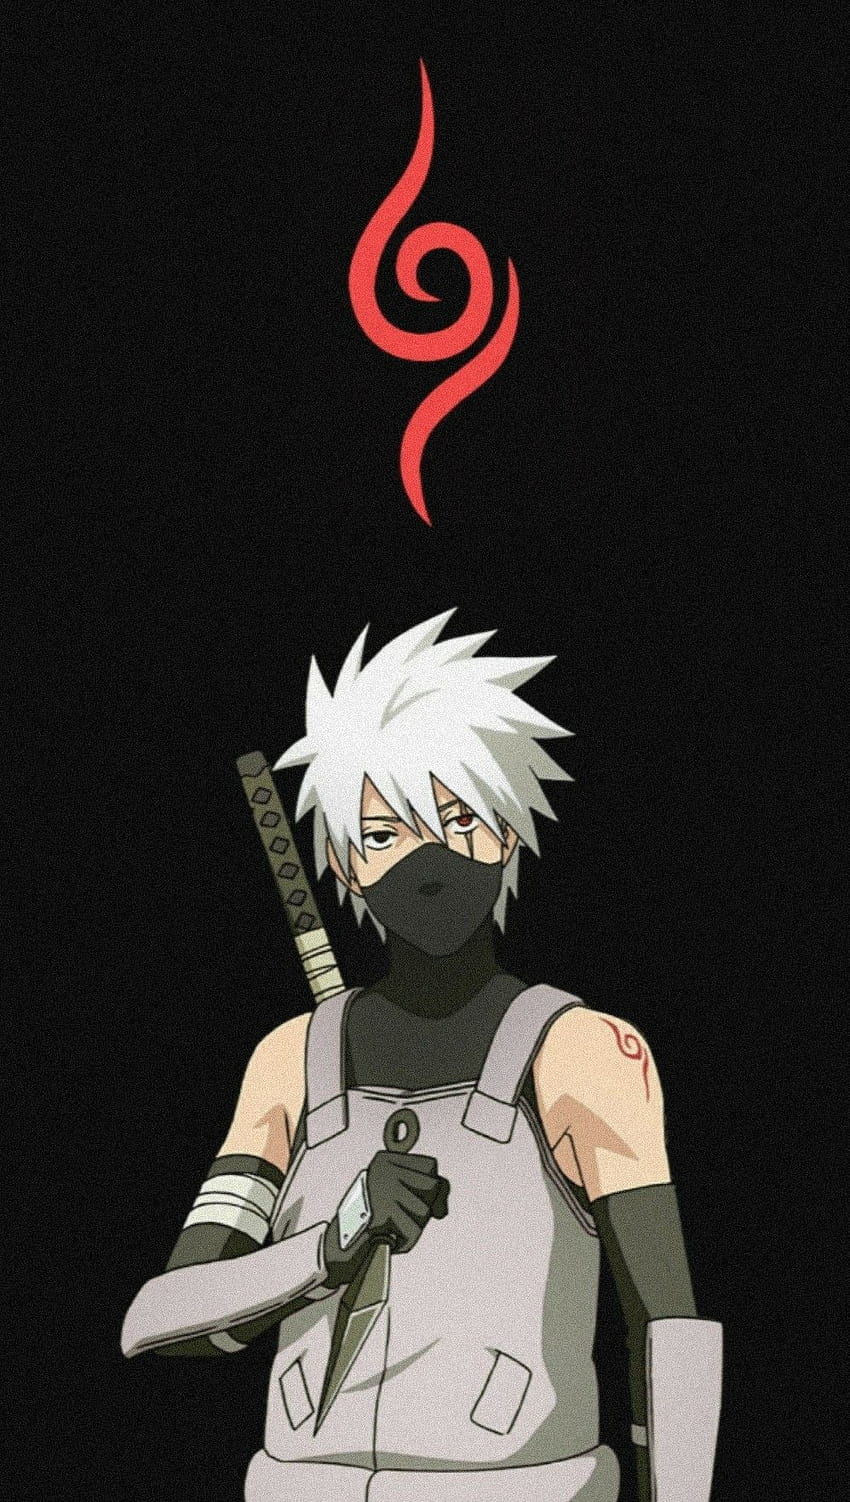 Kakashi Hatake iPhone Wallpaper with high-resolution 1080x1920 pixel. You can use this wallpaper for your iPhone 5, 6, 7, 8, X, XS, XR backgrounds, Mobile Screensaver, or iPad Lock Screen - Kakashi Hatake